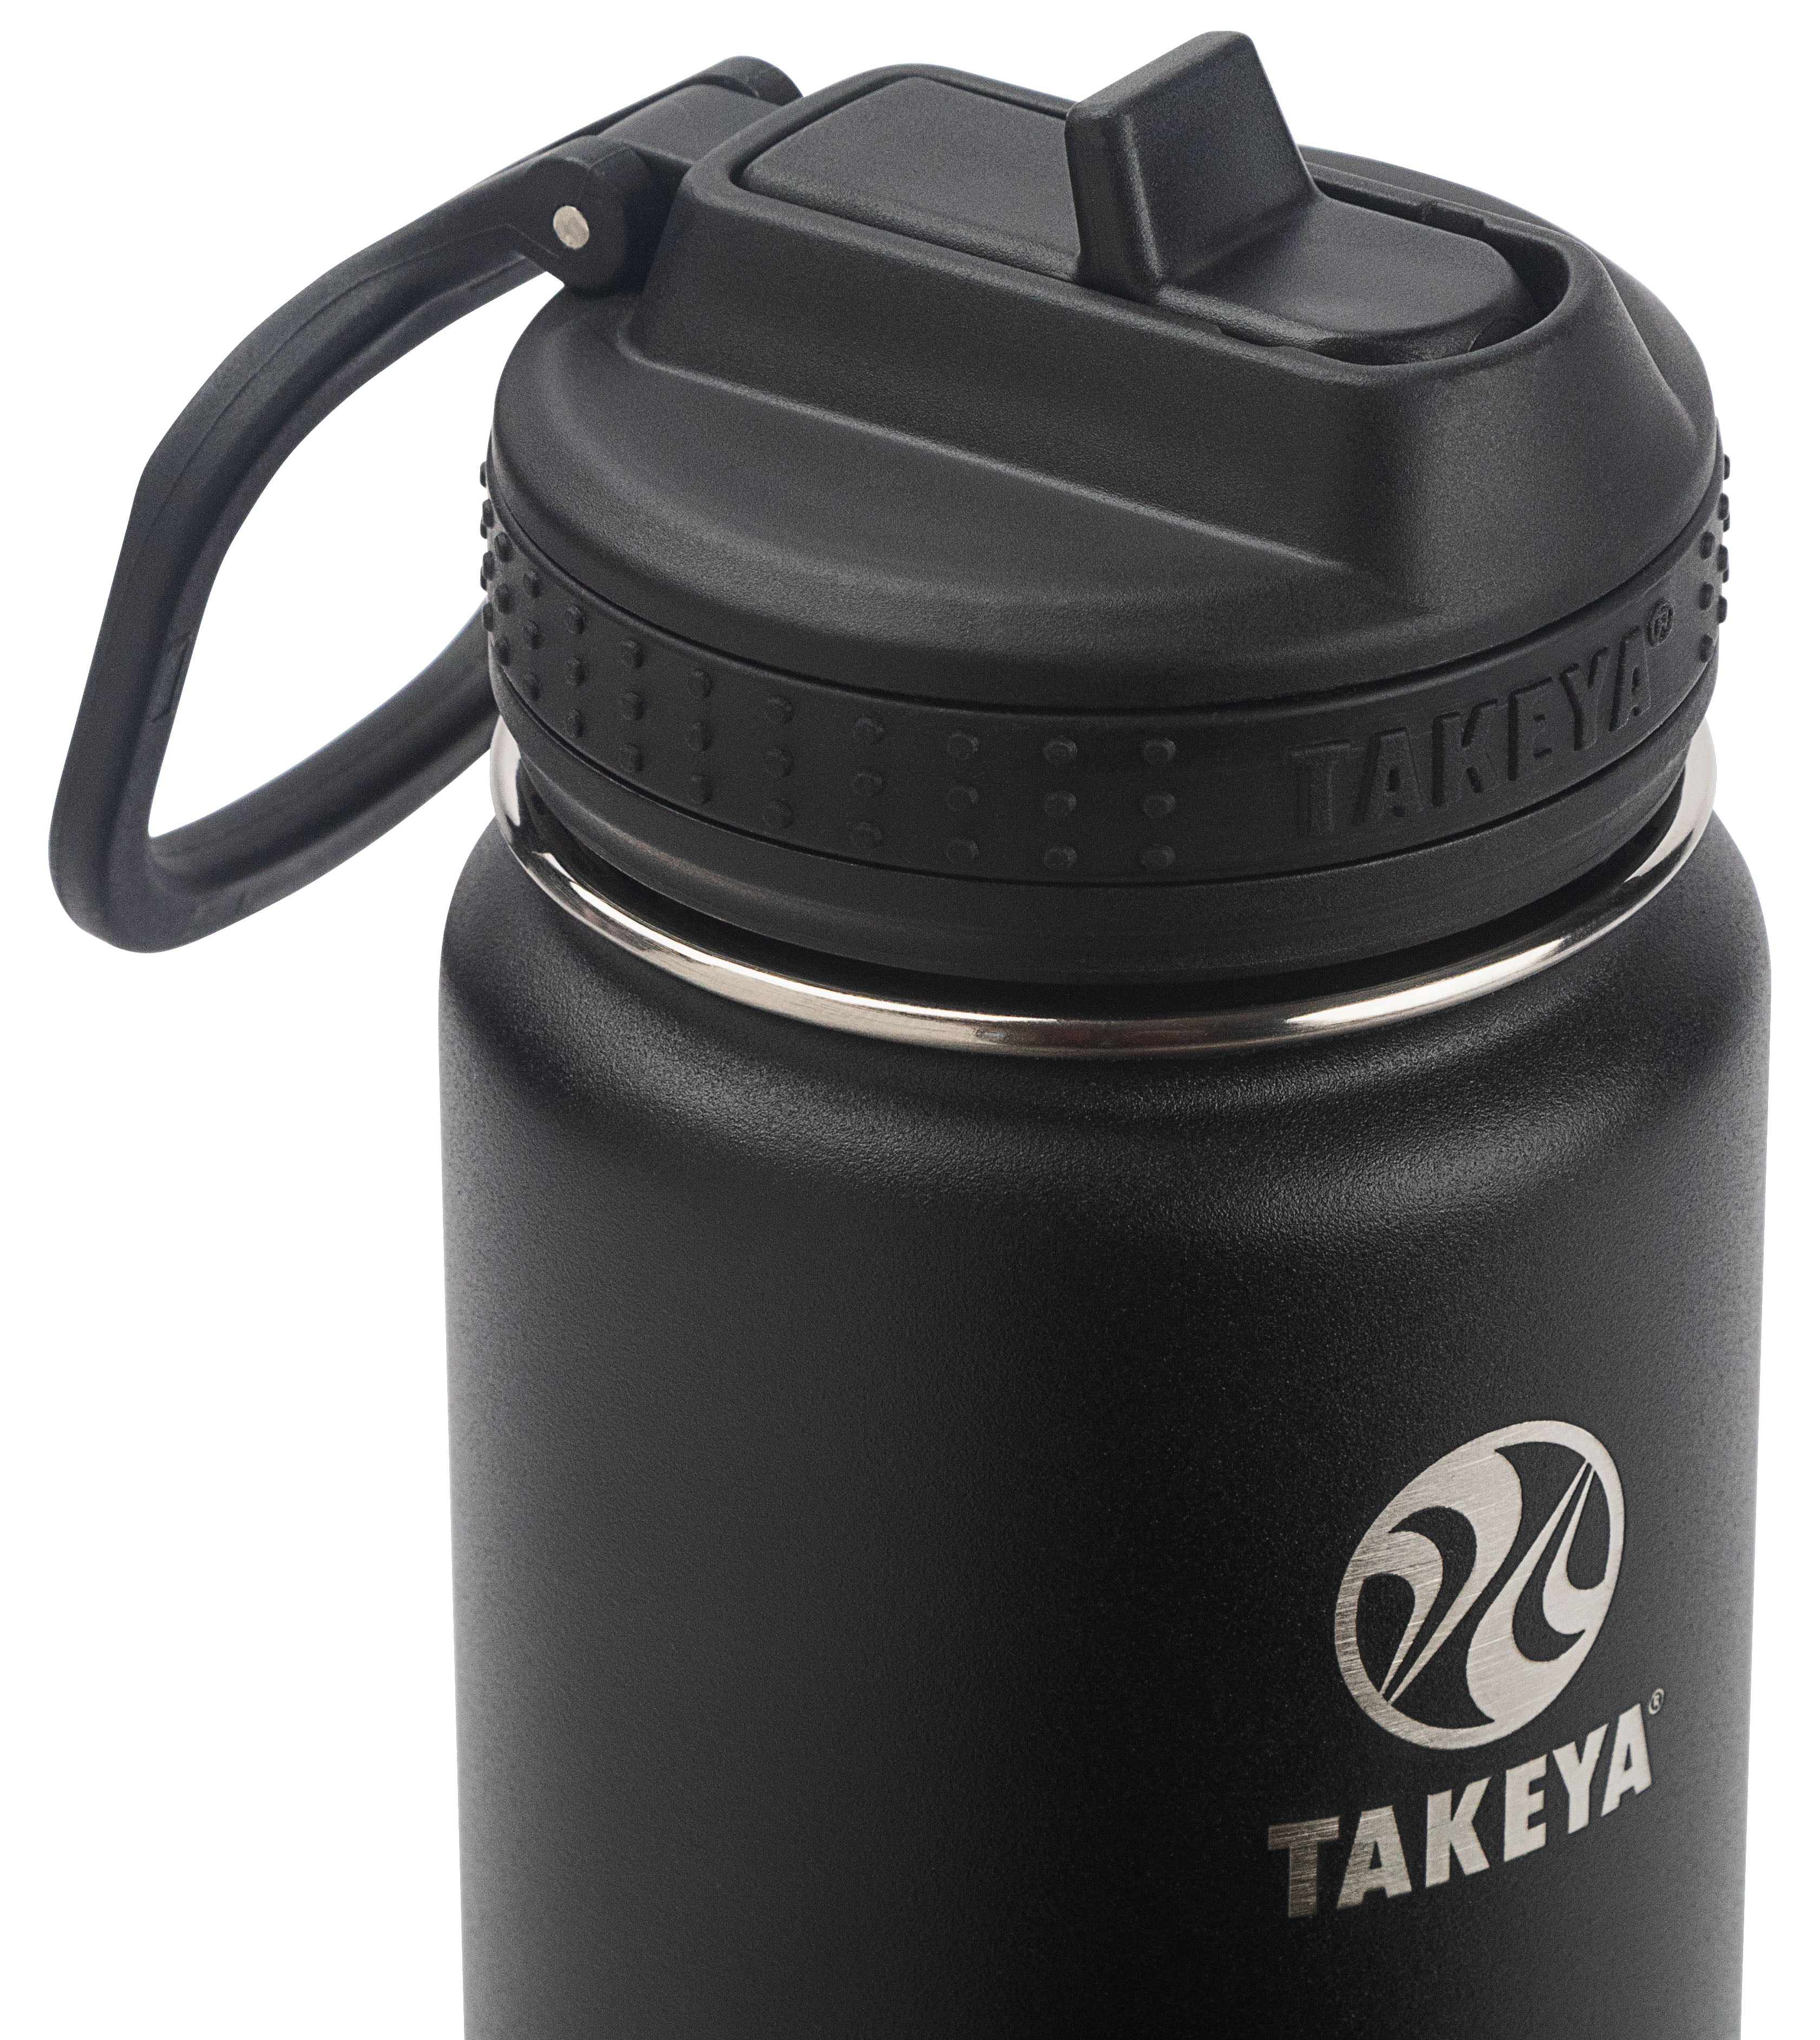 Takeya® Actives Insulated Stainless Steel Water Bottle with Spout Lid -  Teal, 1 unit - Foods Co.